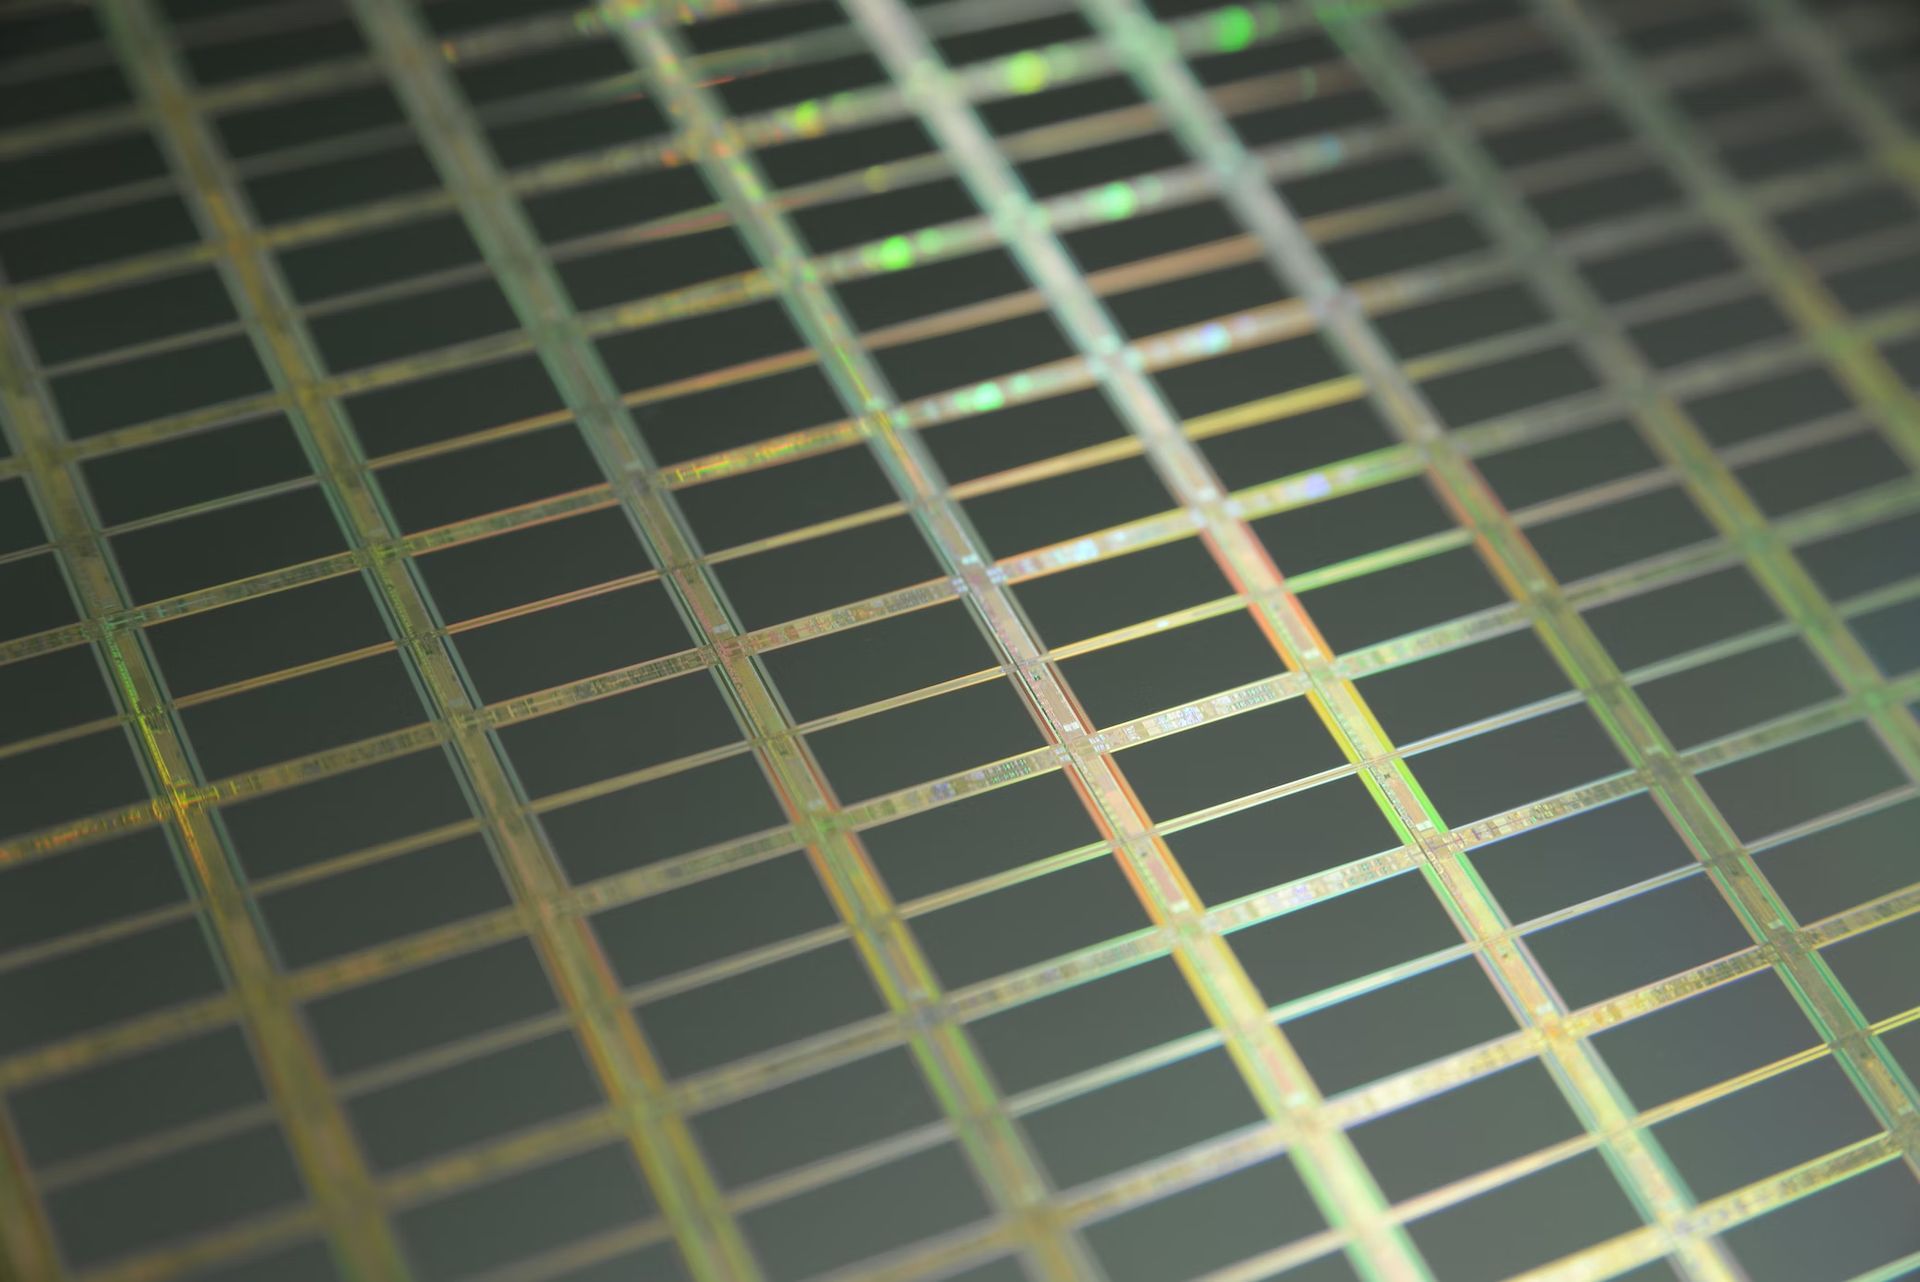 Silicon image sensors enable faster image processing